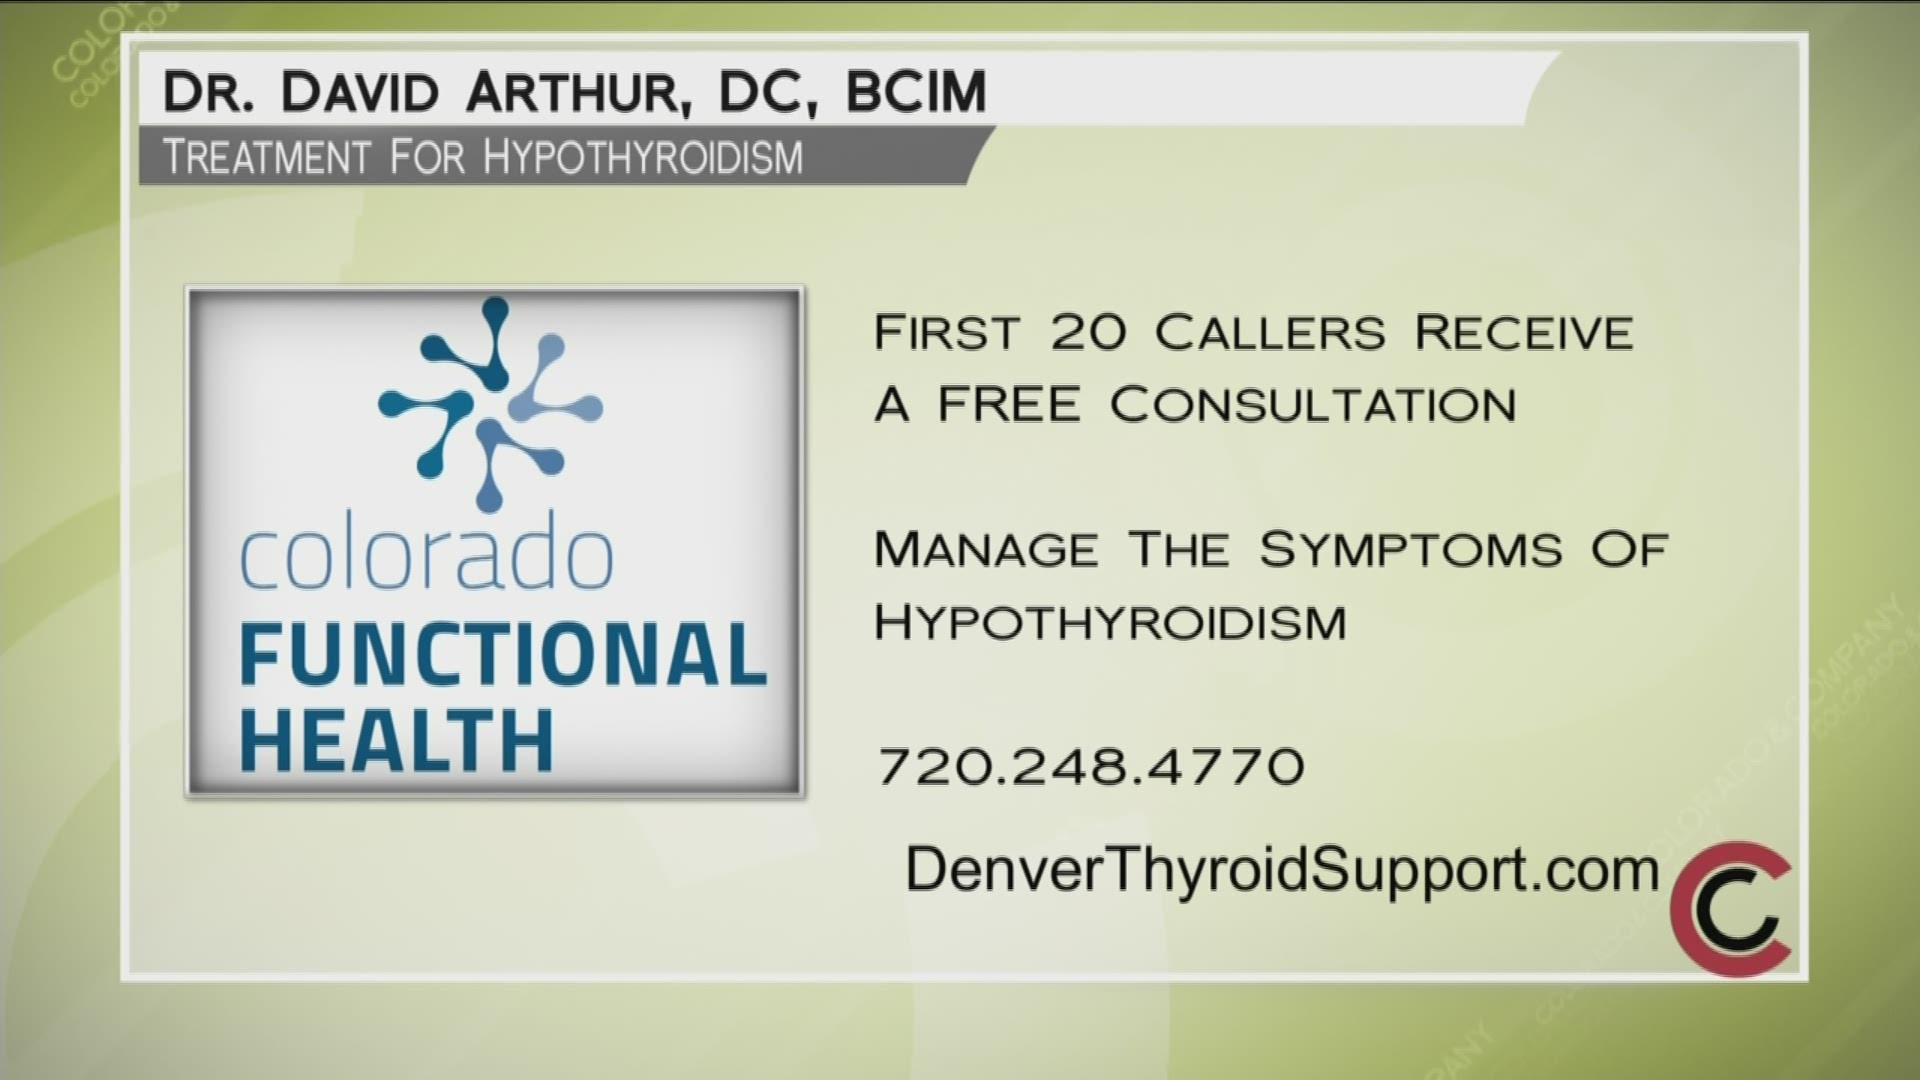 The first 20 callers to 720.248.4770 will get a free initial consultation. Learn about Dr. Arthur and how he can help you at www.DenverThyroidSupport.com.